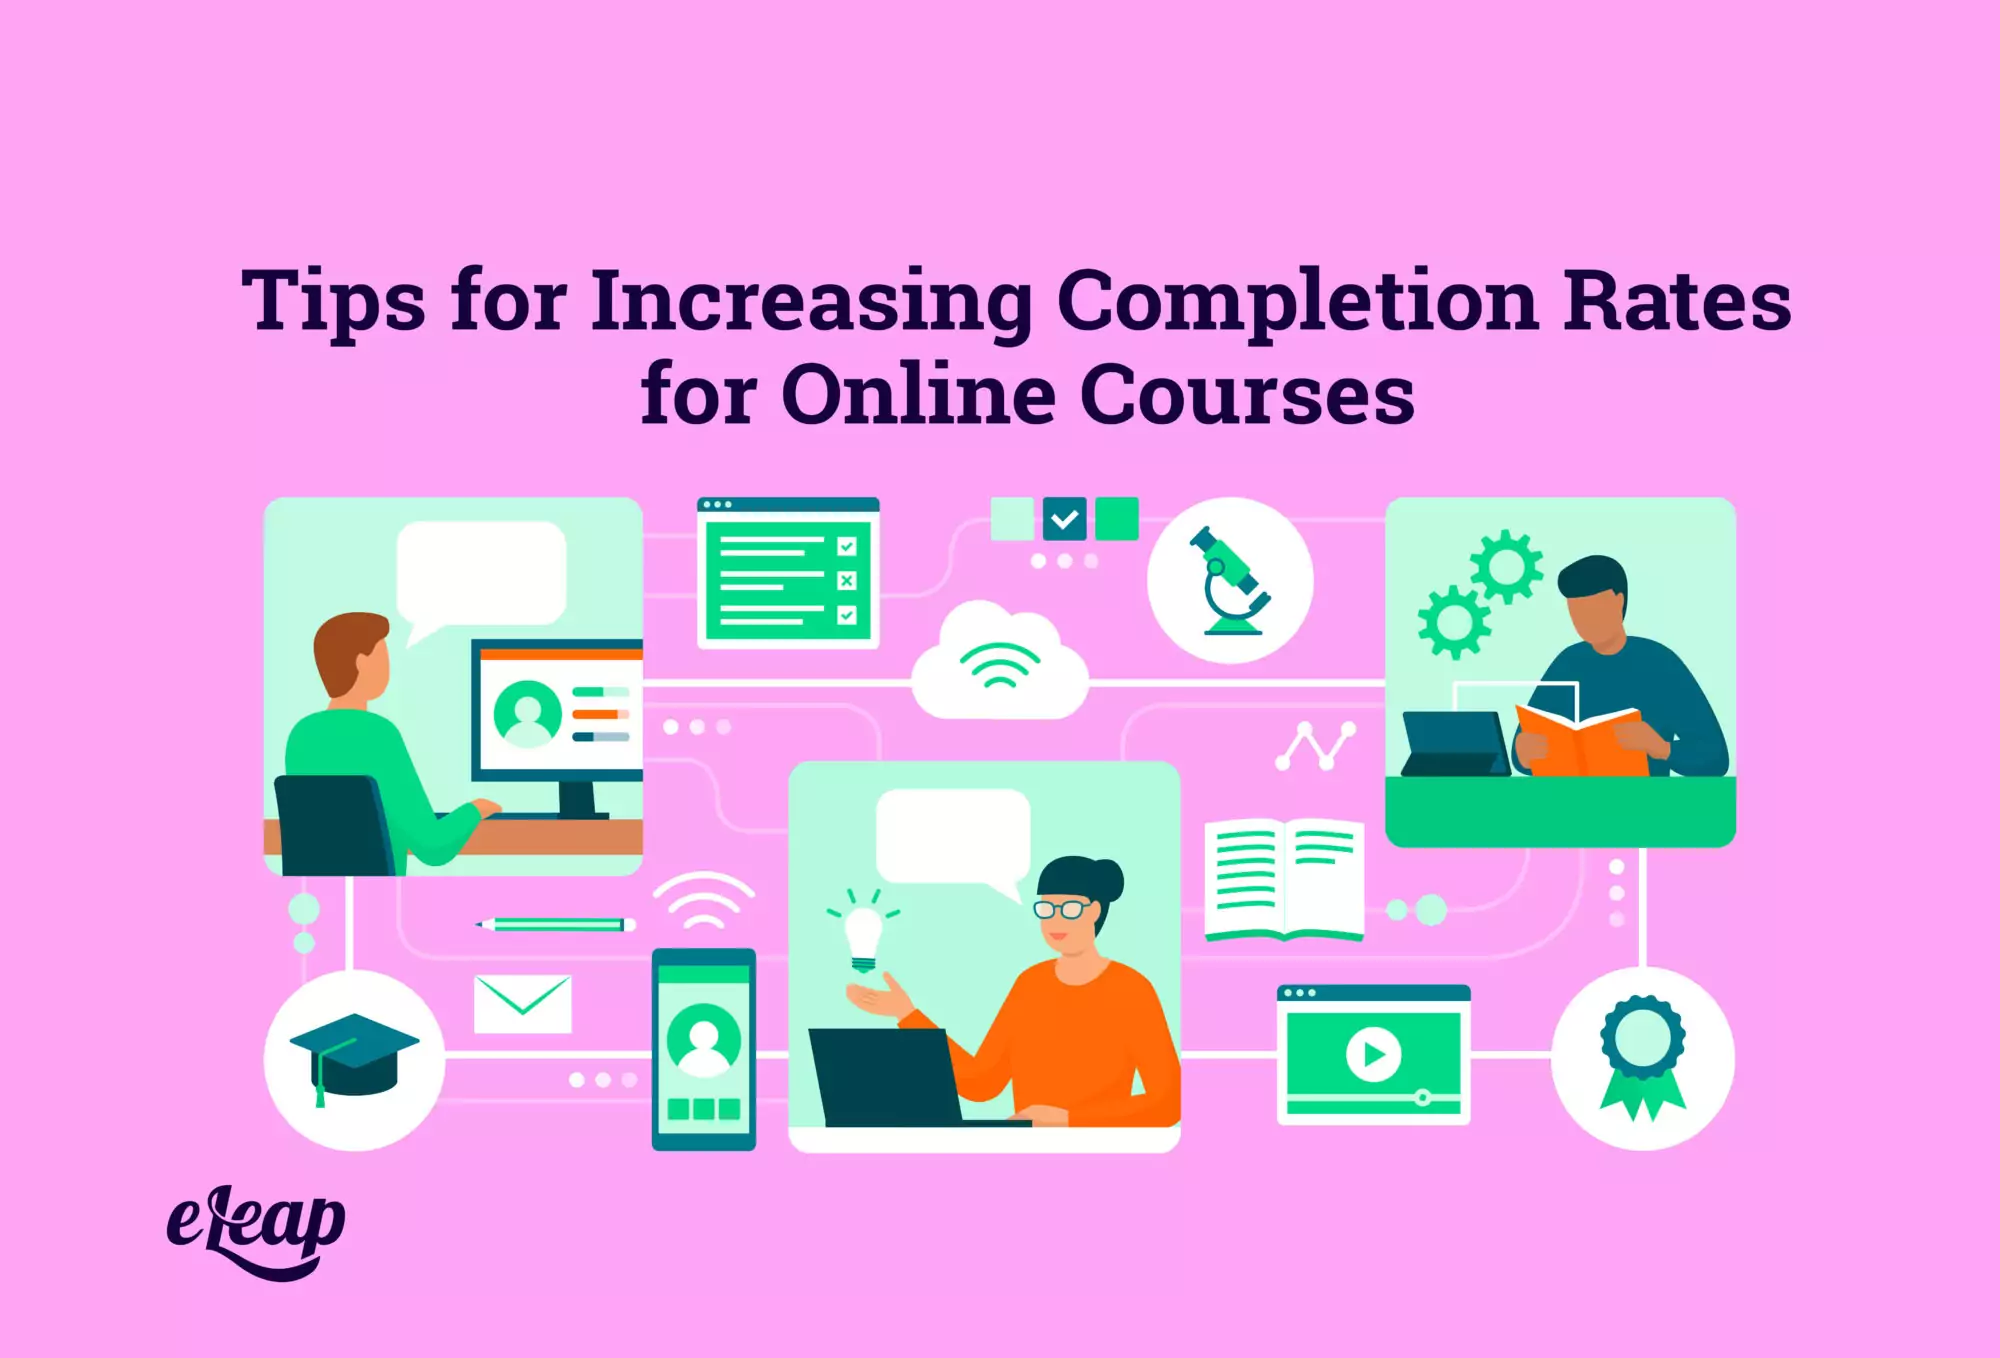 Tips for Increasing Completion Rates for Online Courses